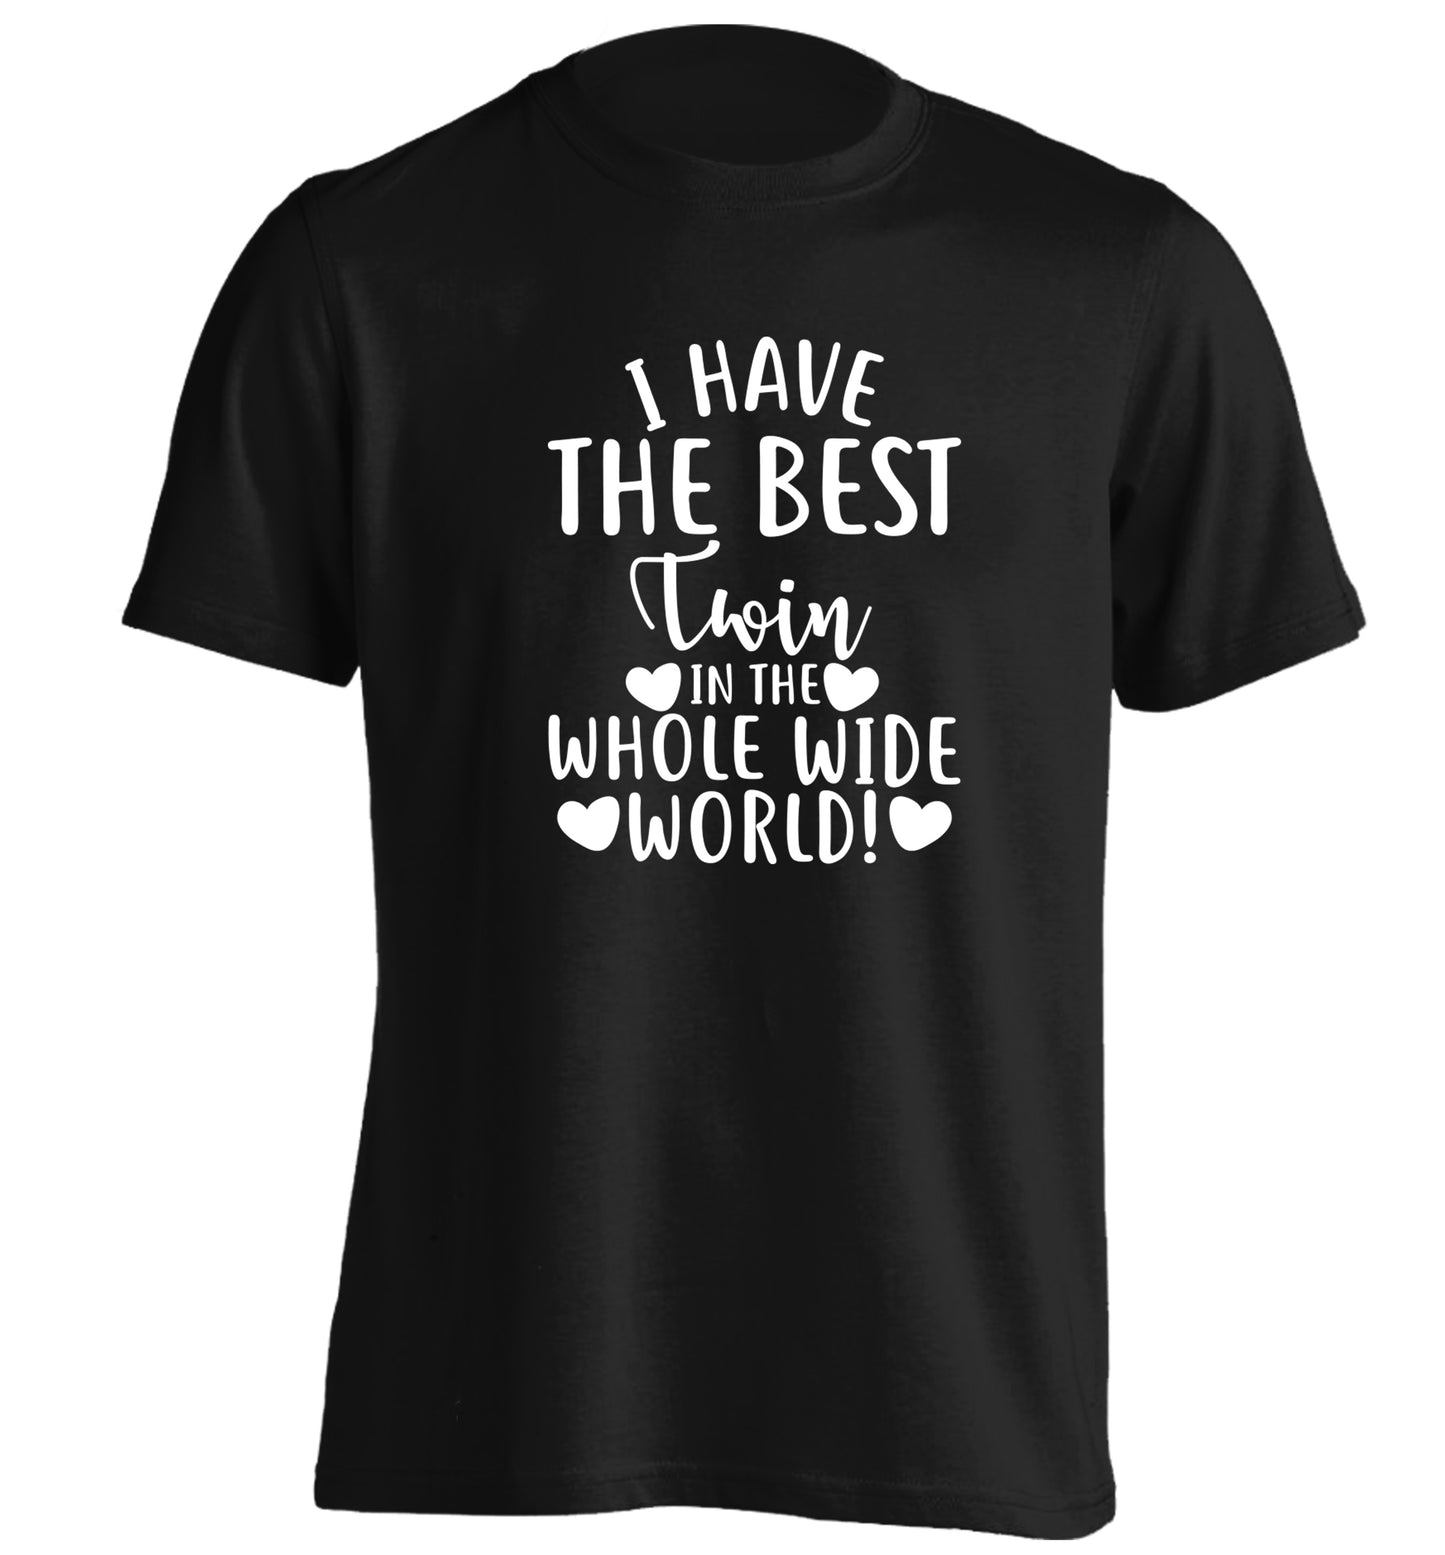 I have the best twin in the whole wide world! adults unisex black Tshirt 2XL